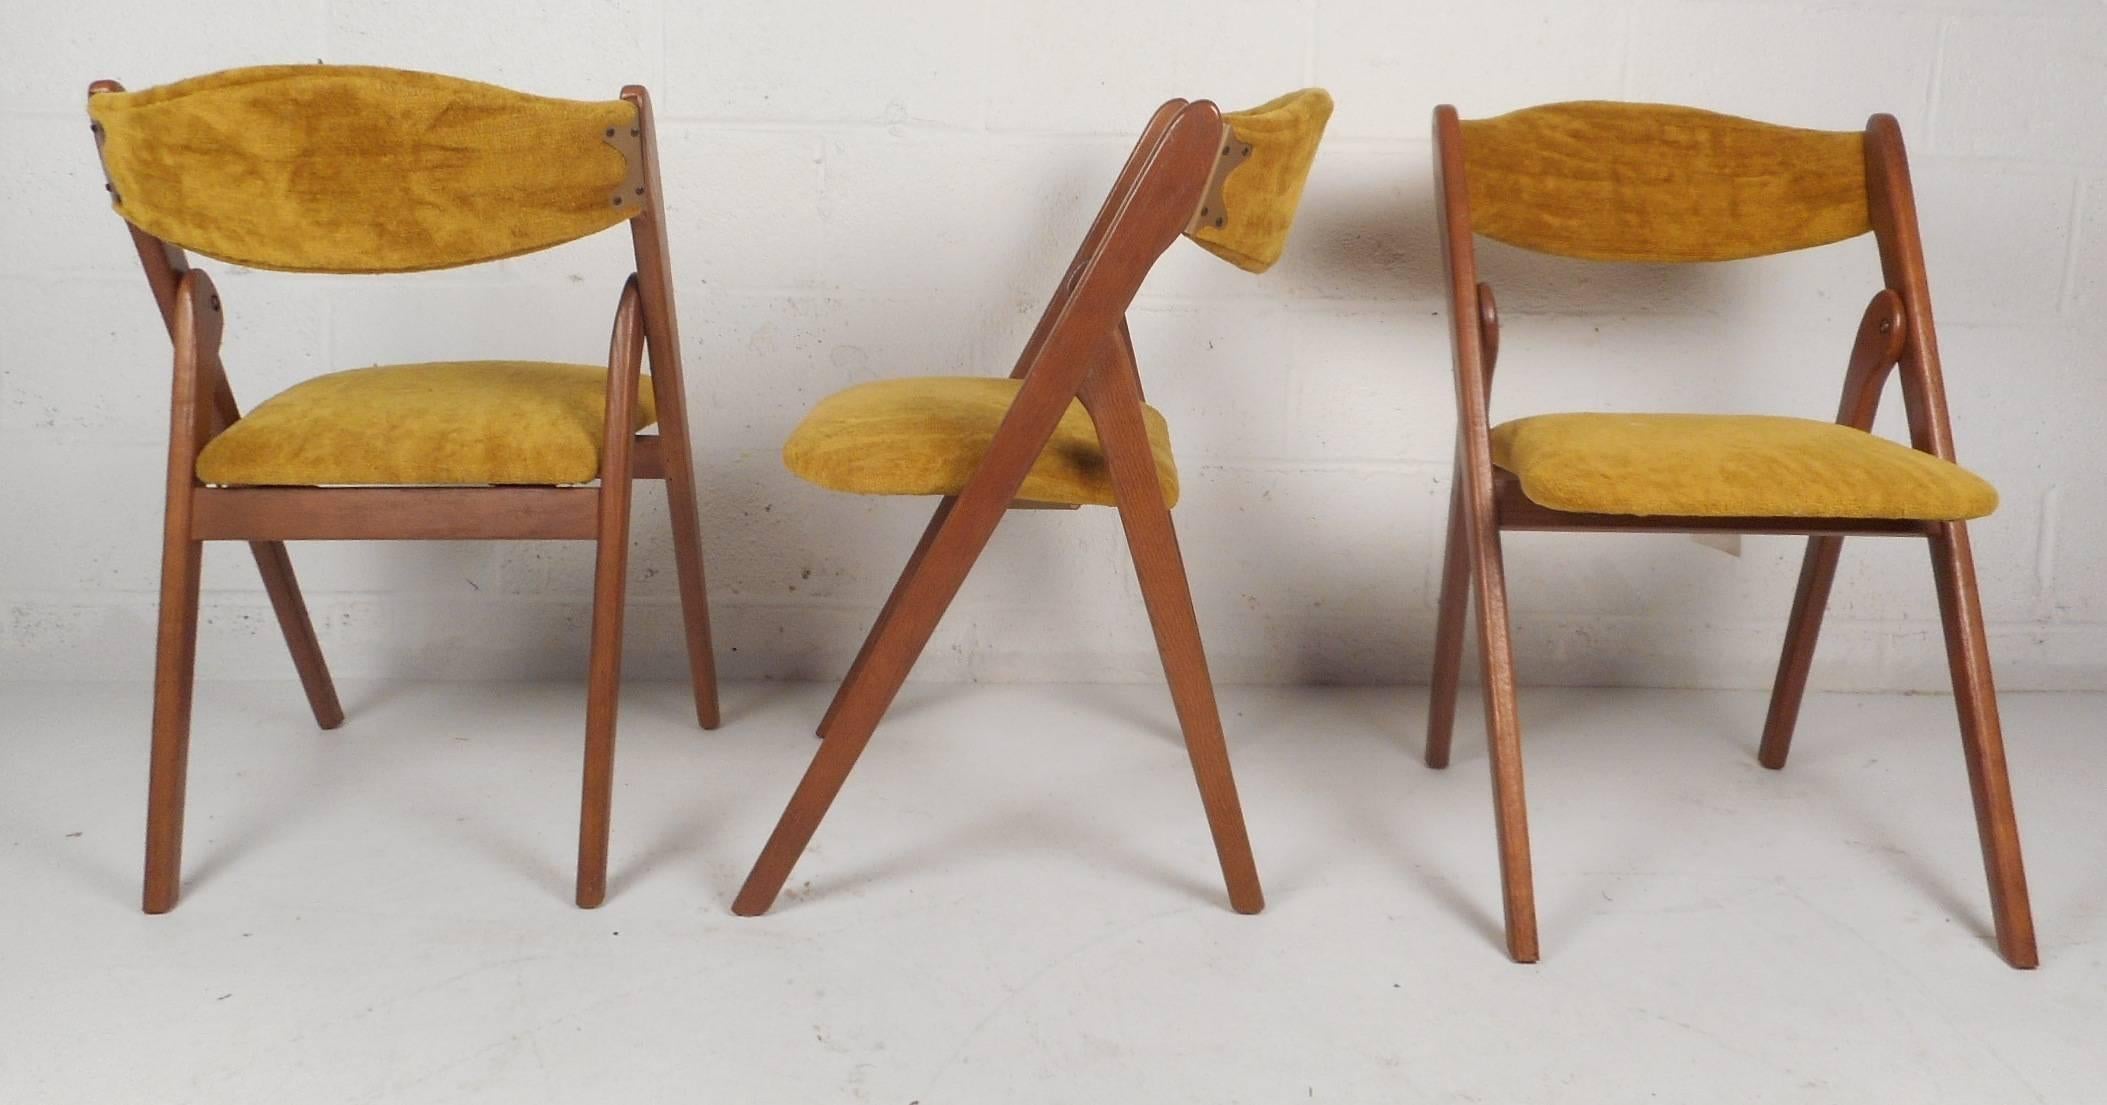 This beautiful set of six vintage modern dining chairs feature plush yellow upholstery and the ability to fold up for storage. Sleek design has a curved backrest ensuring maximum comfort. Quality craftsmanship on display with angled legs and